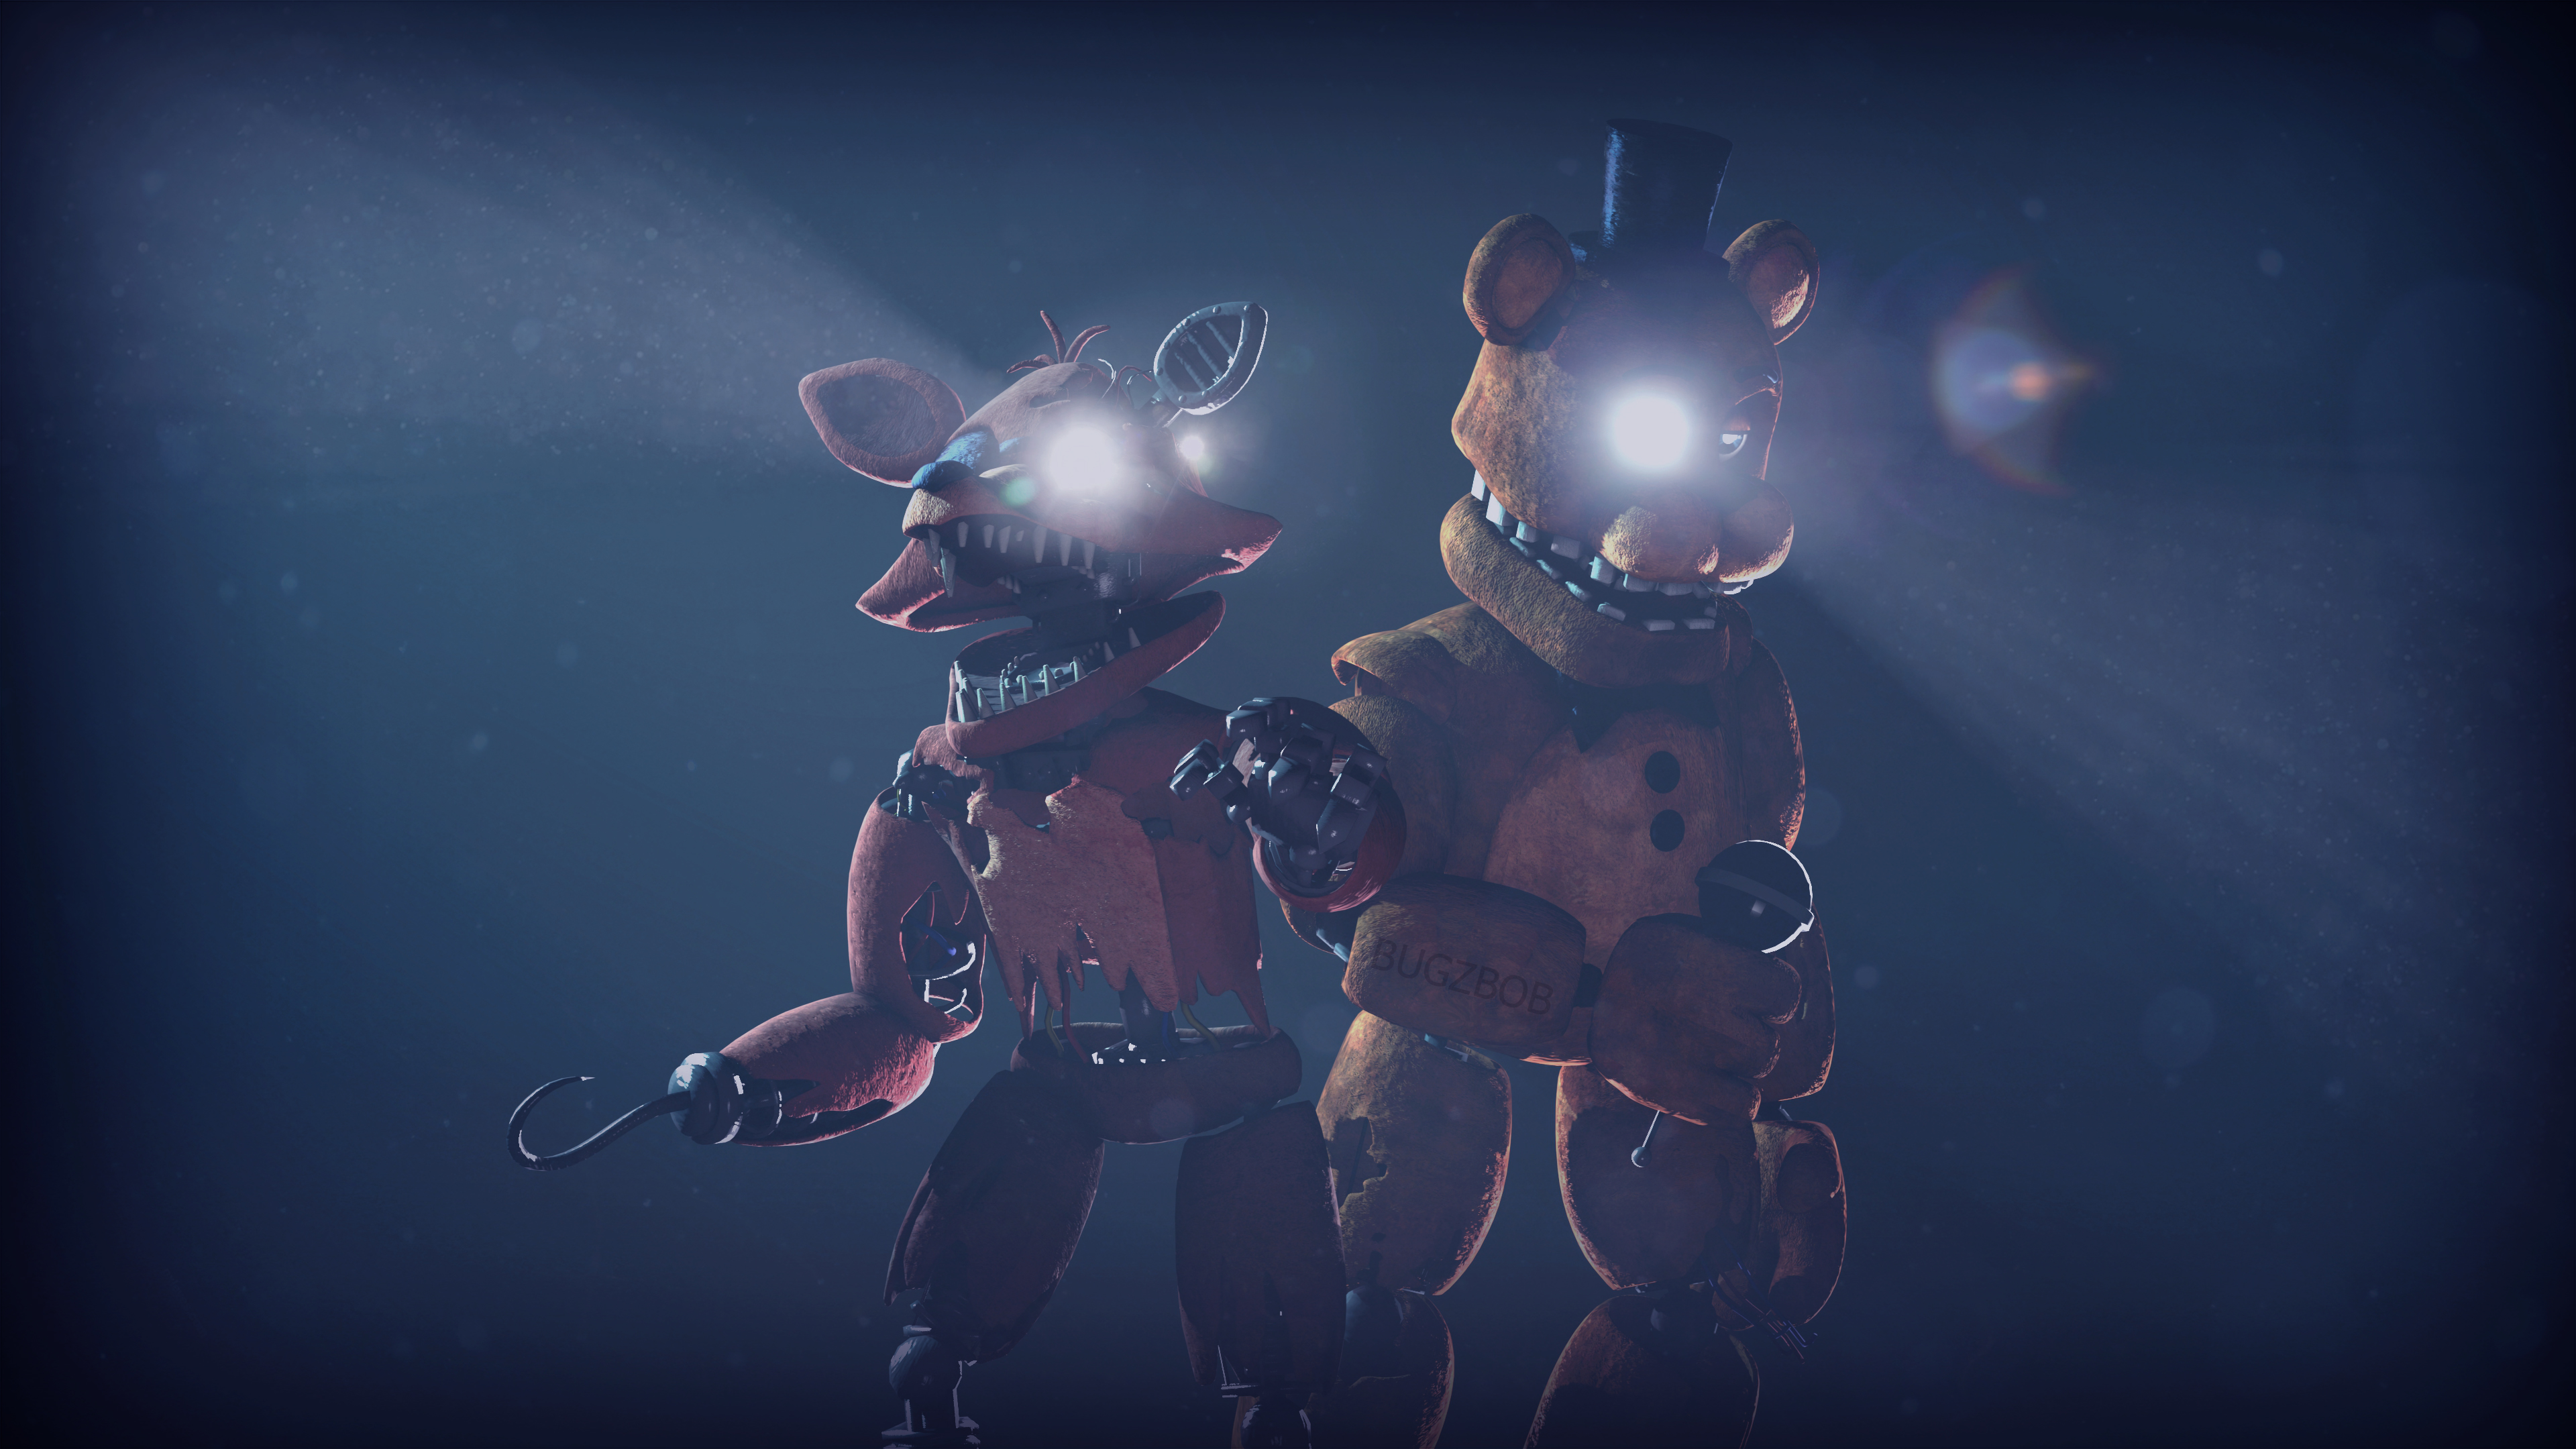 FNAF SFM] Withered Foxy Jumpscare Remake by MartinFBS on DeviantArt